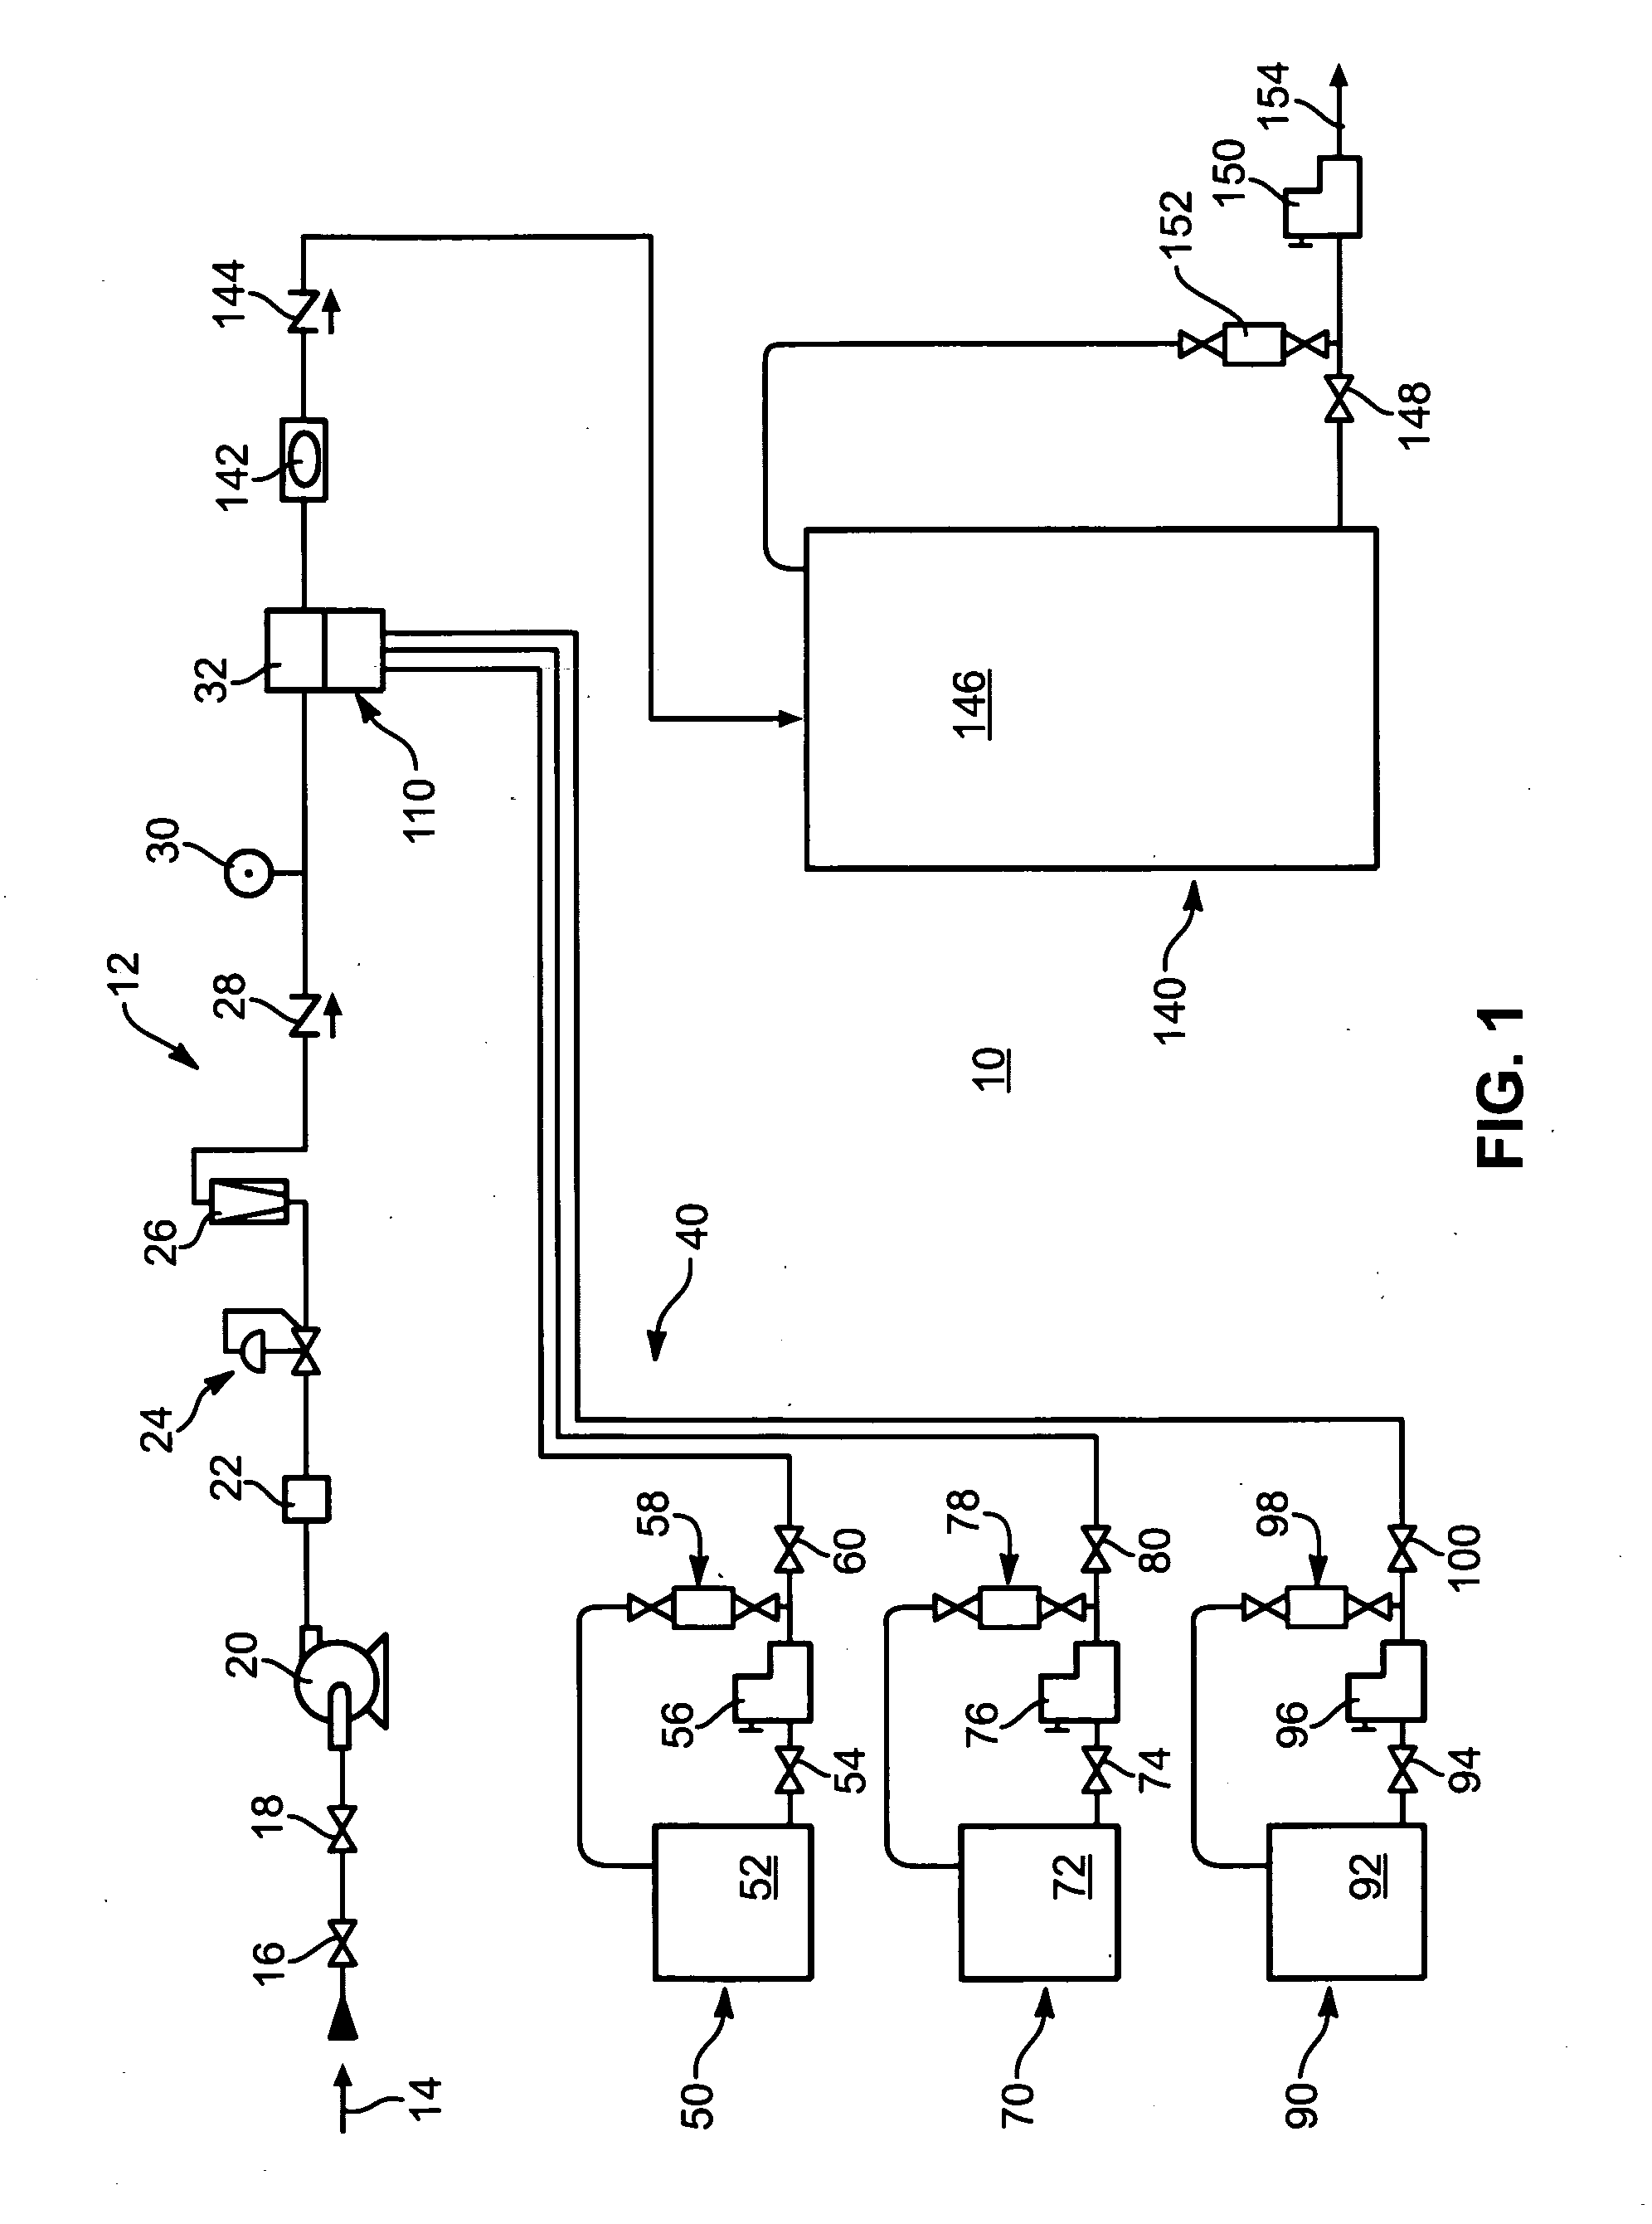 Apparatus and methods for efficient generation of chlorine dioxide